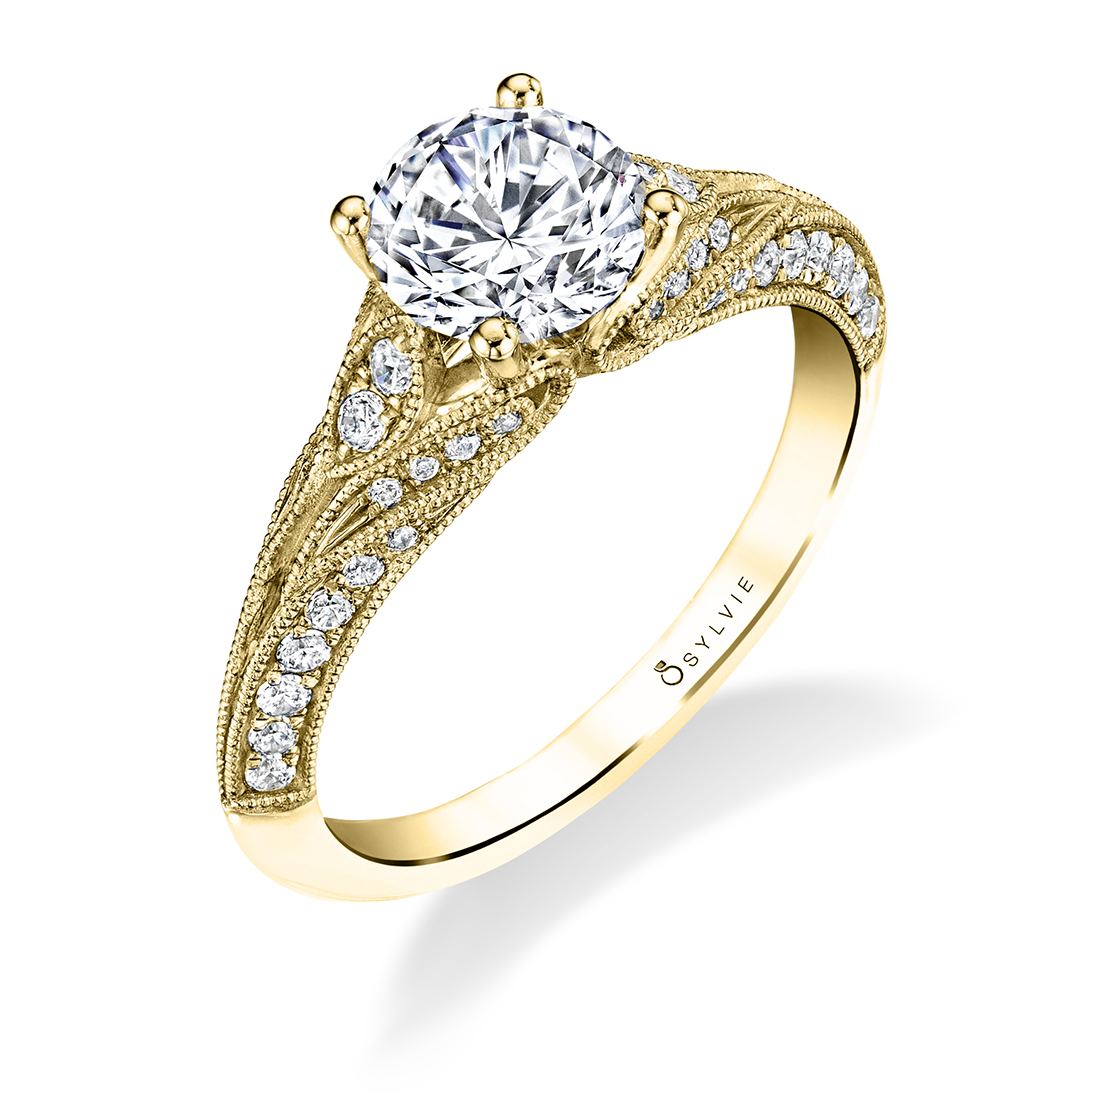 Antique Inspired Engagement Ring in Yellow Gold - Livia